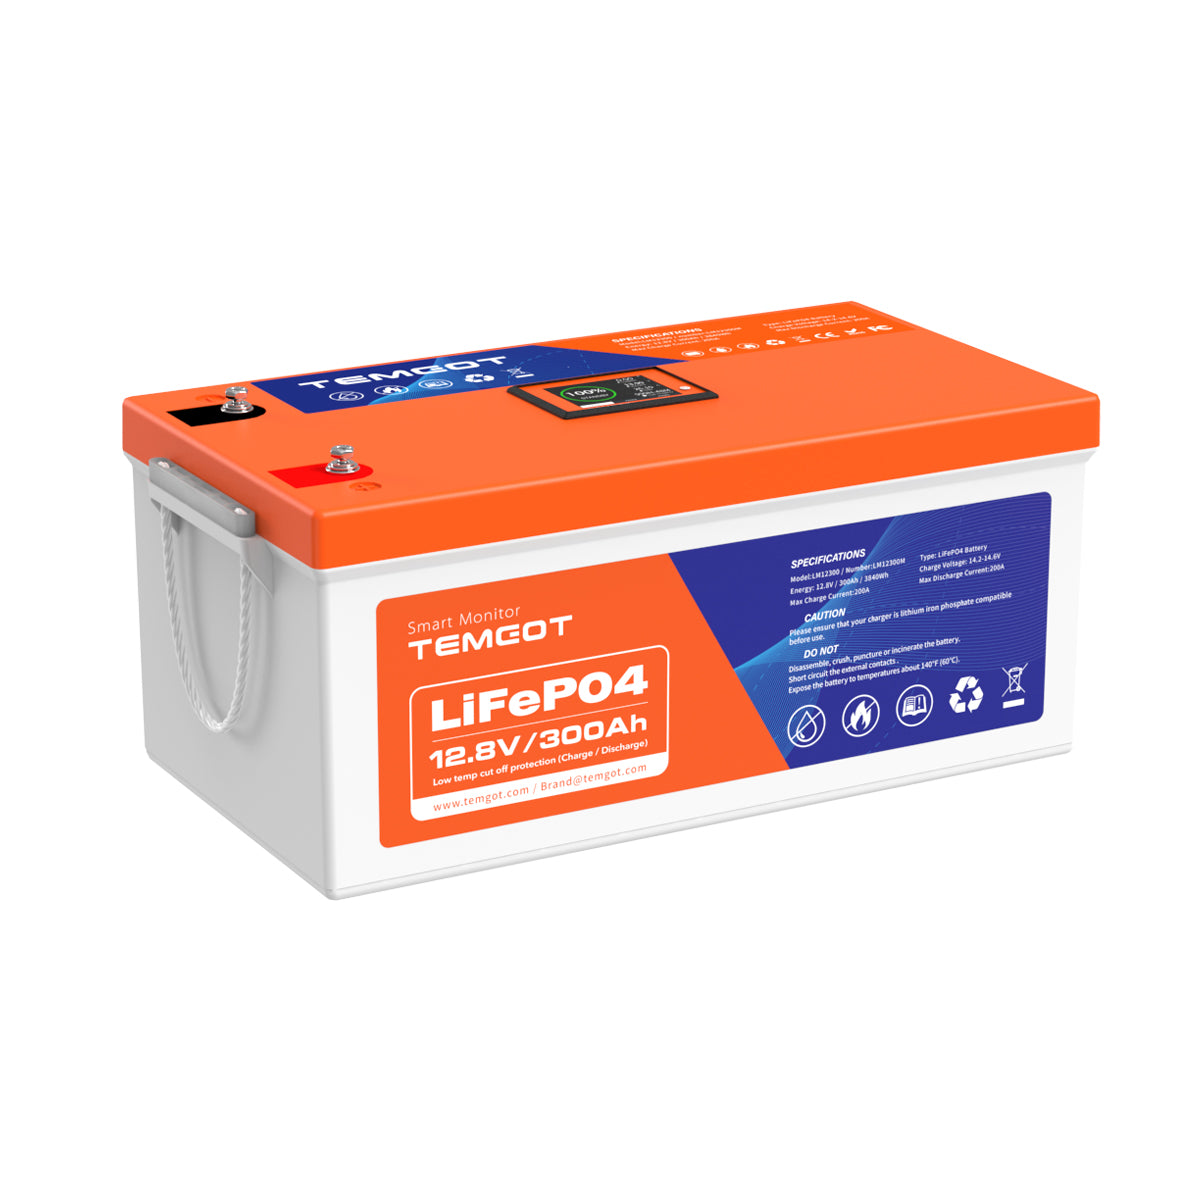 Temgot LiFePO4 Battery 12V 300Ah Lithium Battery - Built-in Bluetooth, 5000+ Cycles, Perfect for Replacing Most of Backup Power, Home Energy Storage and Off-Grid etc.